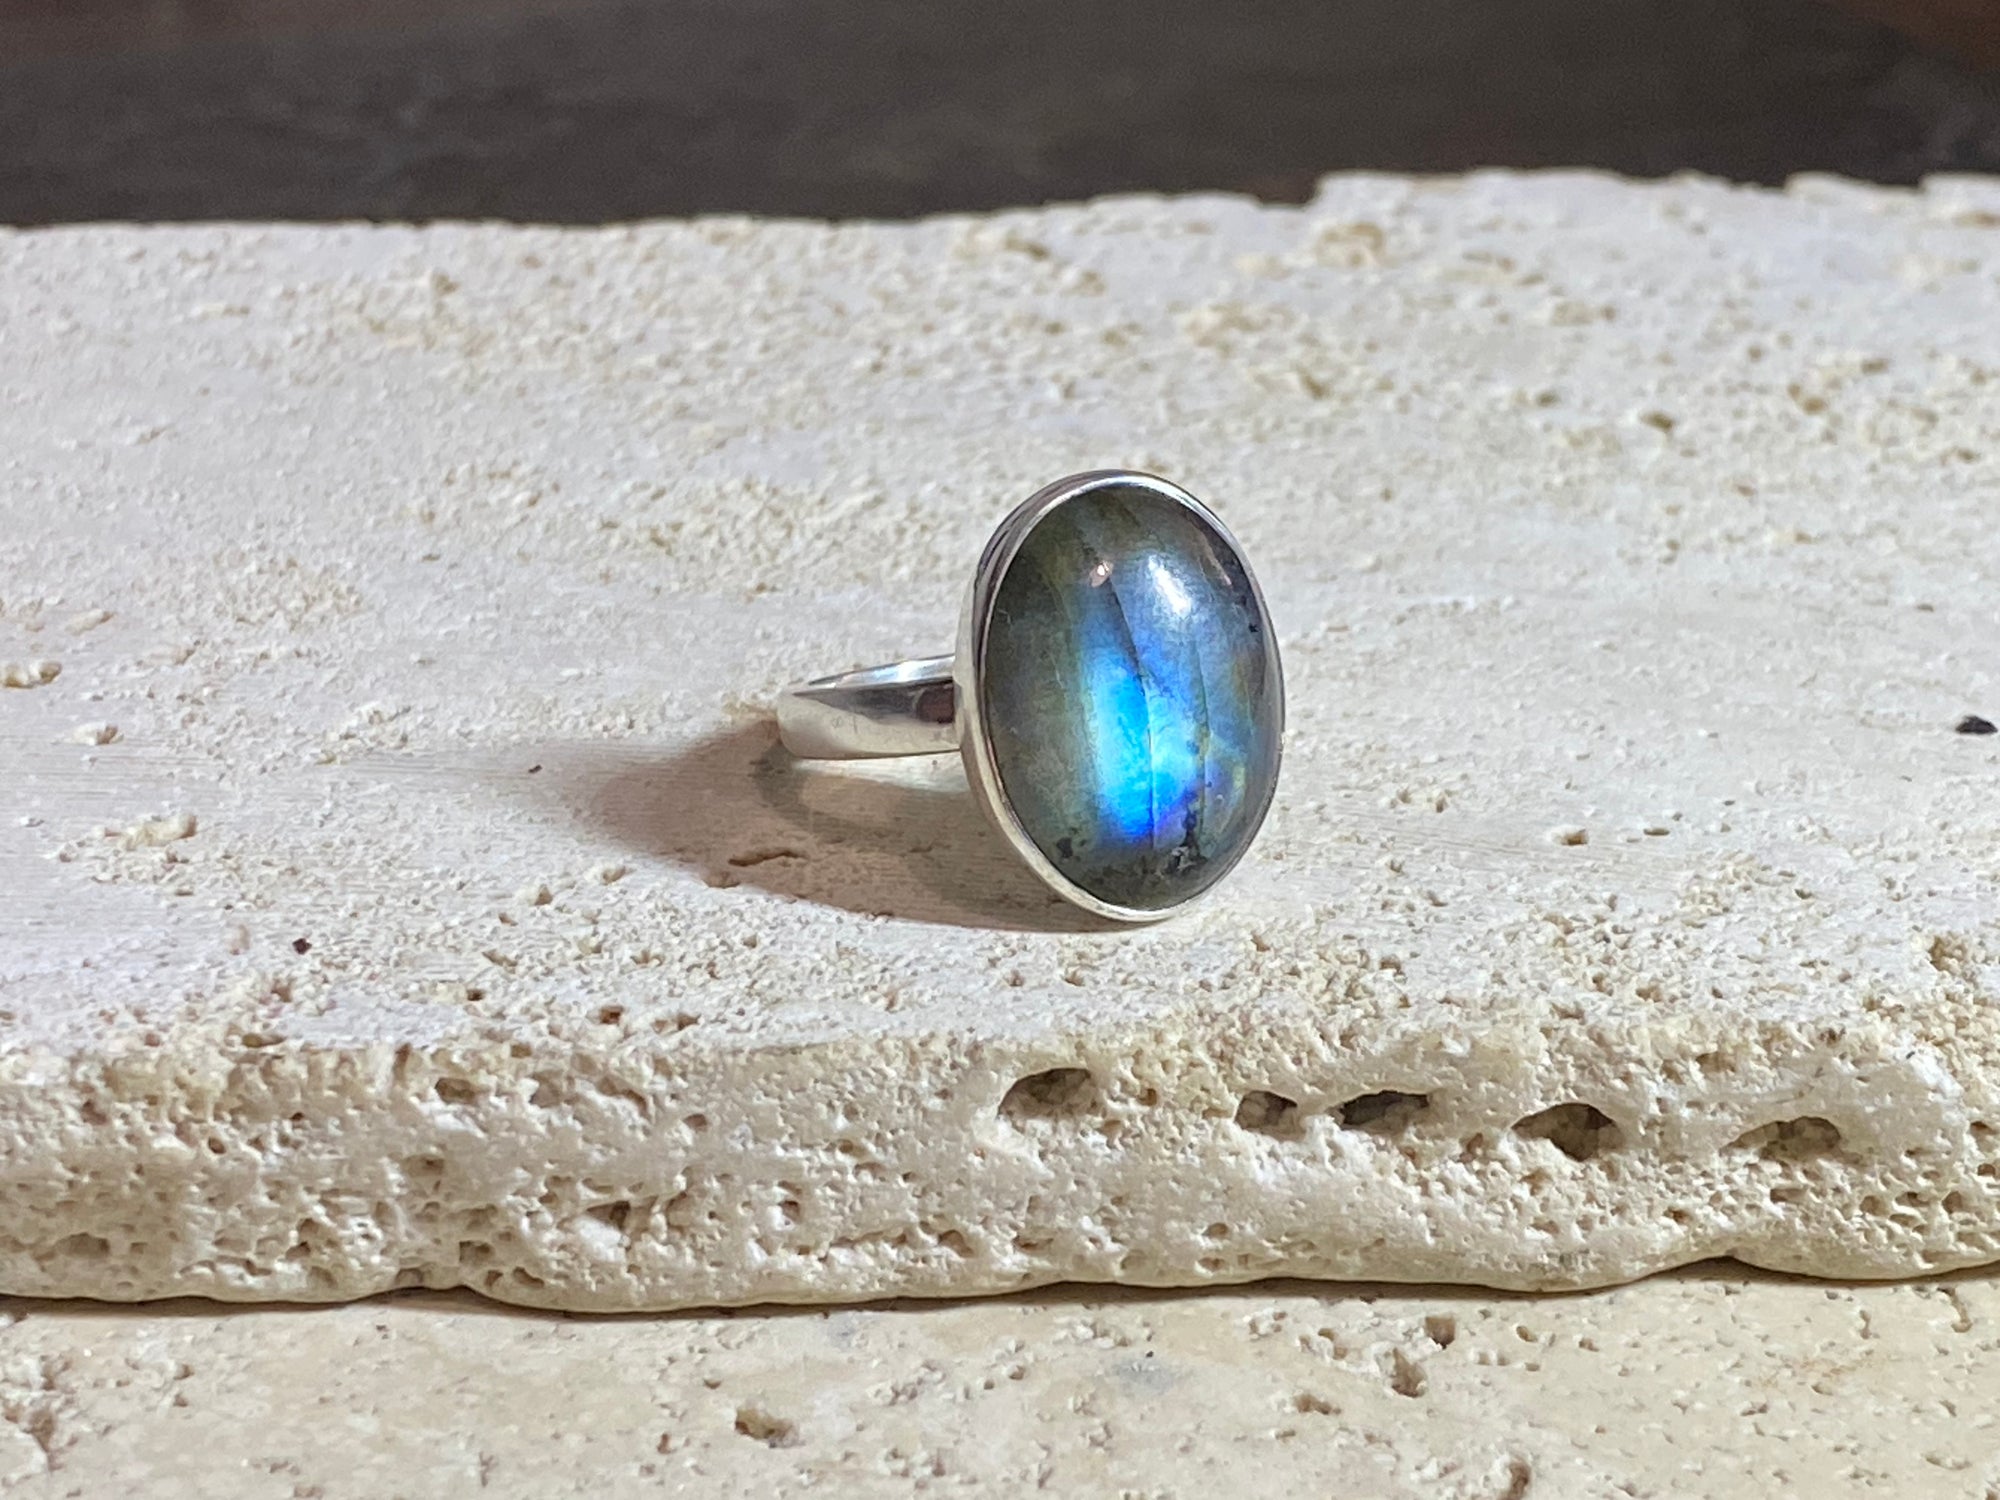 Round oval labradorite ring set in sterling silver. A high quality stone with green, blue and orange fire.  Size 7.5